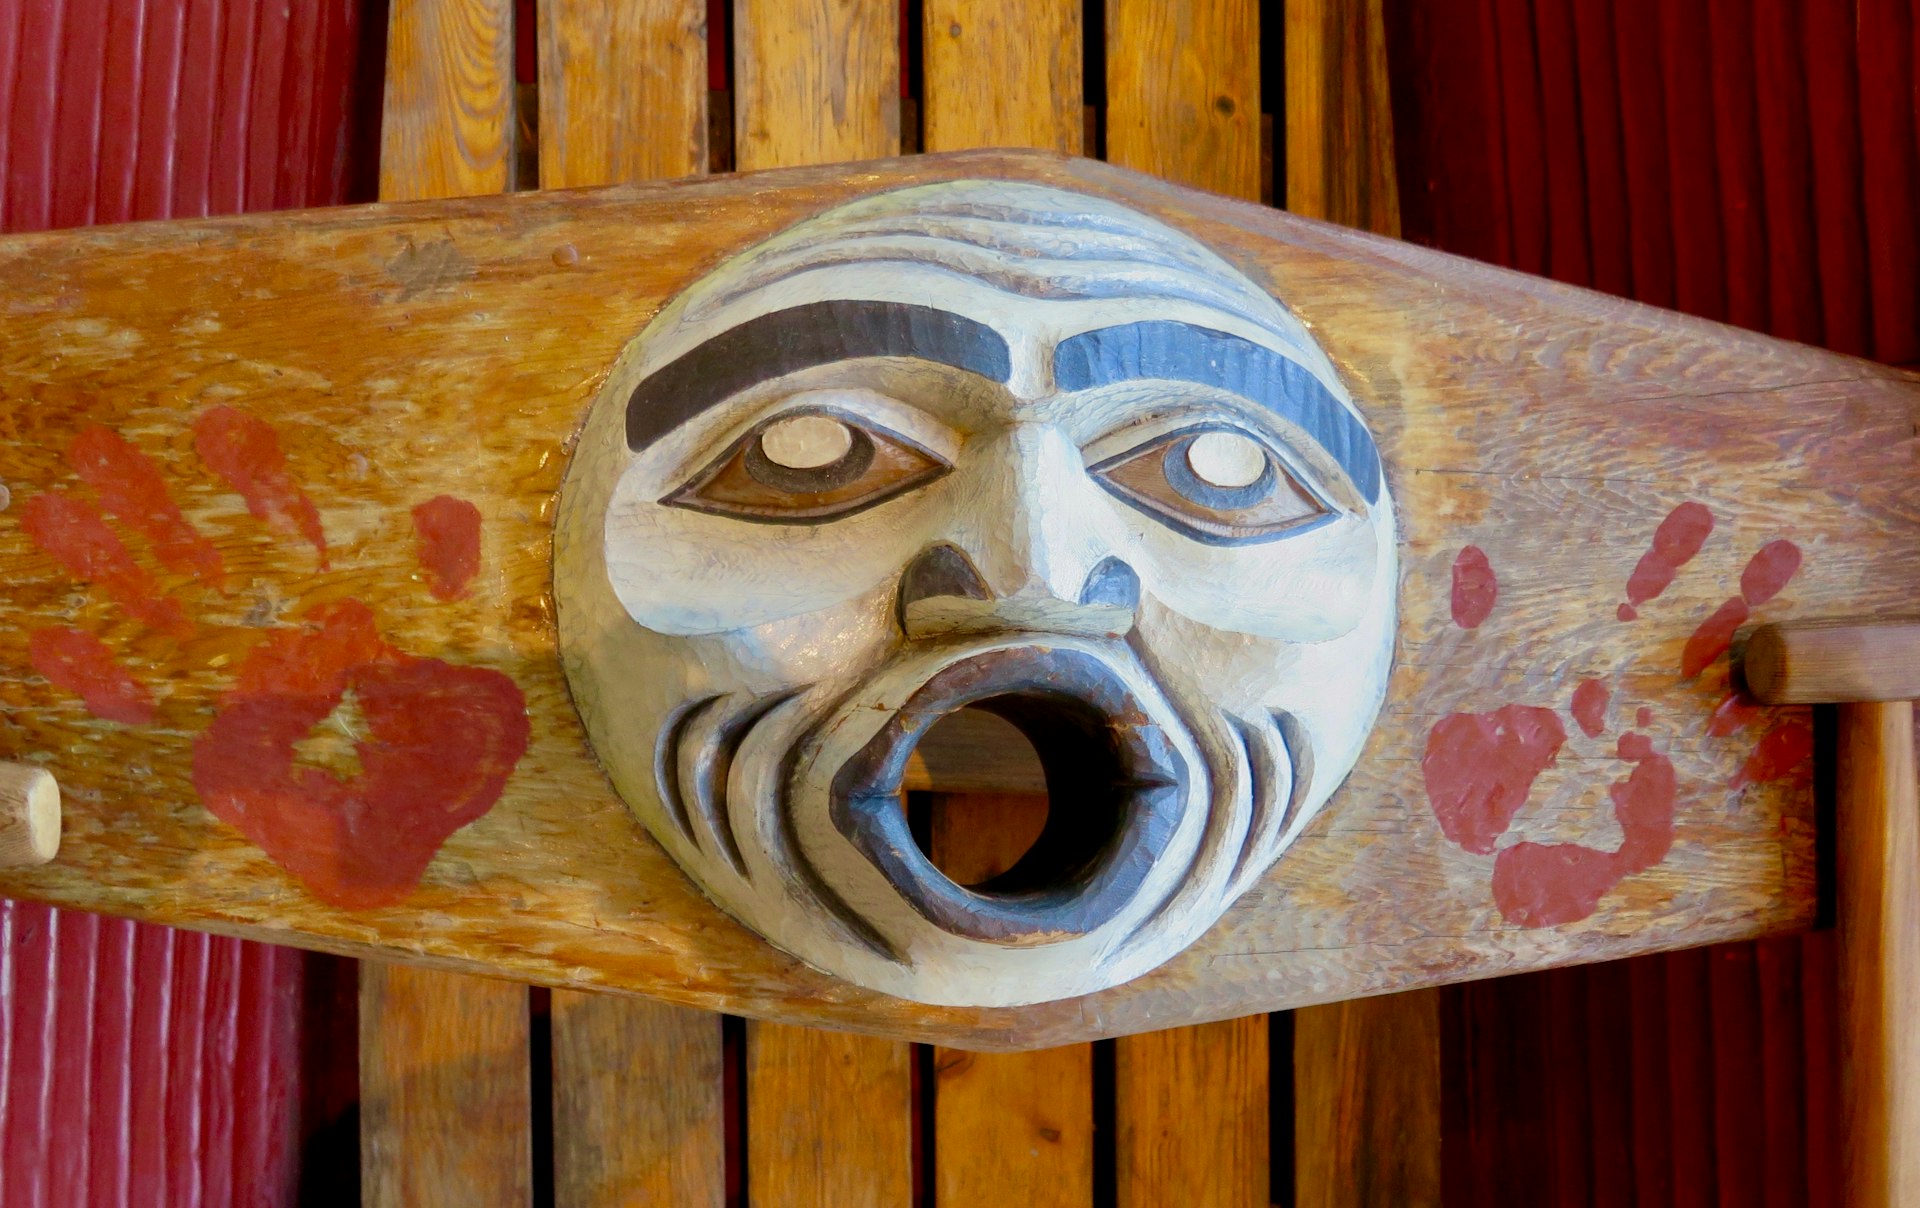 Canoe carving at Squamish Lil'wat Cultural Centre in Whistler